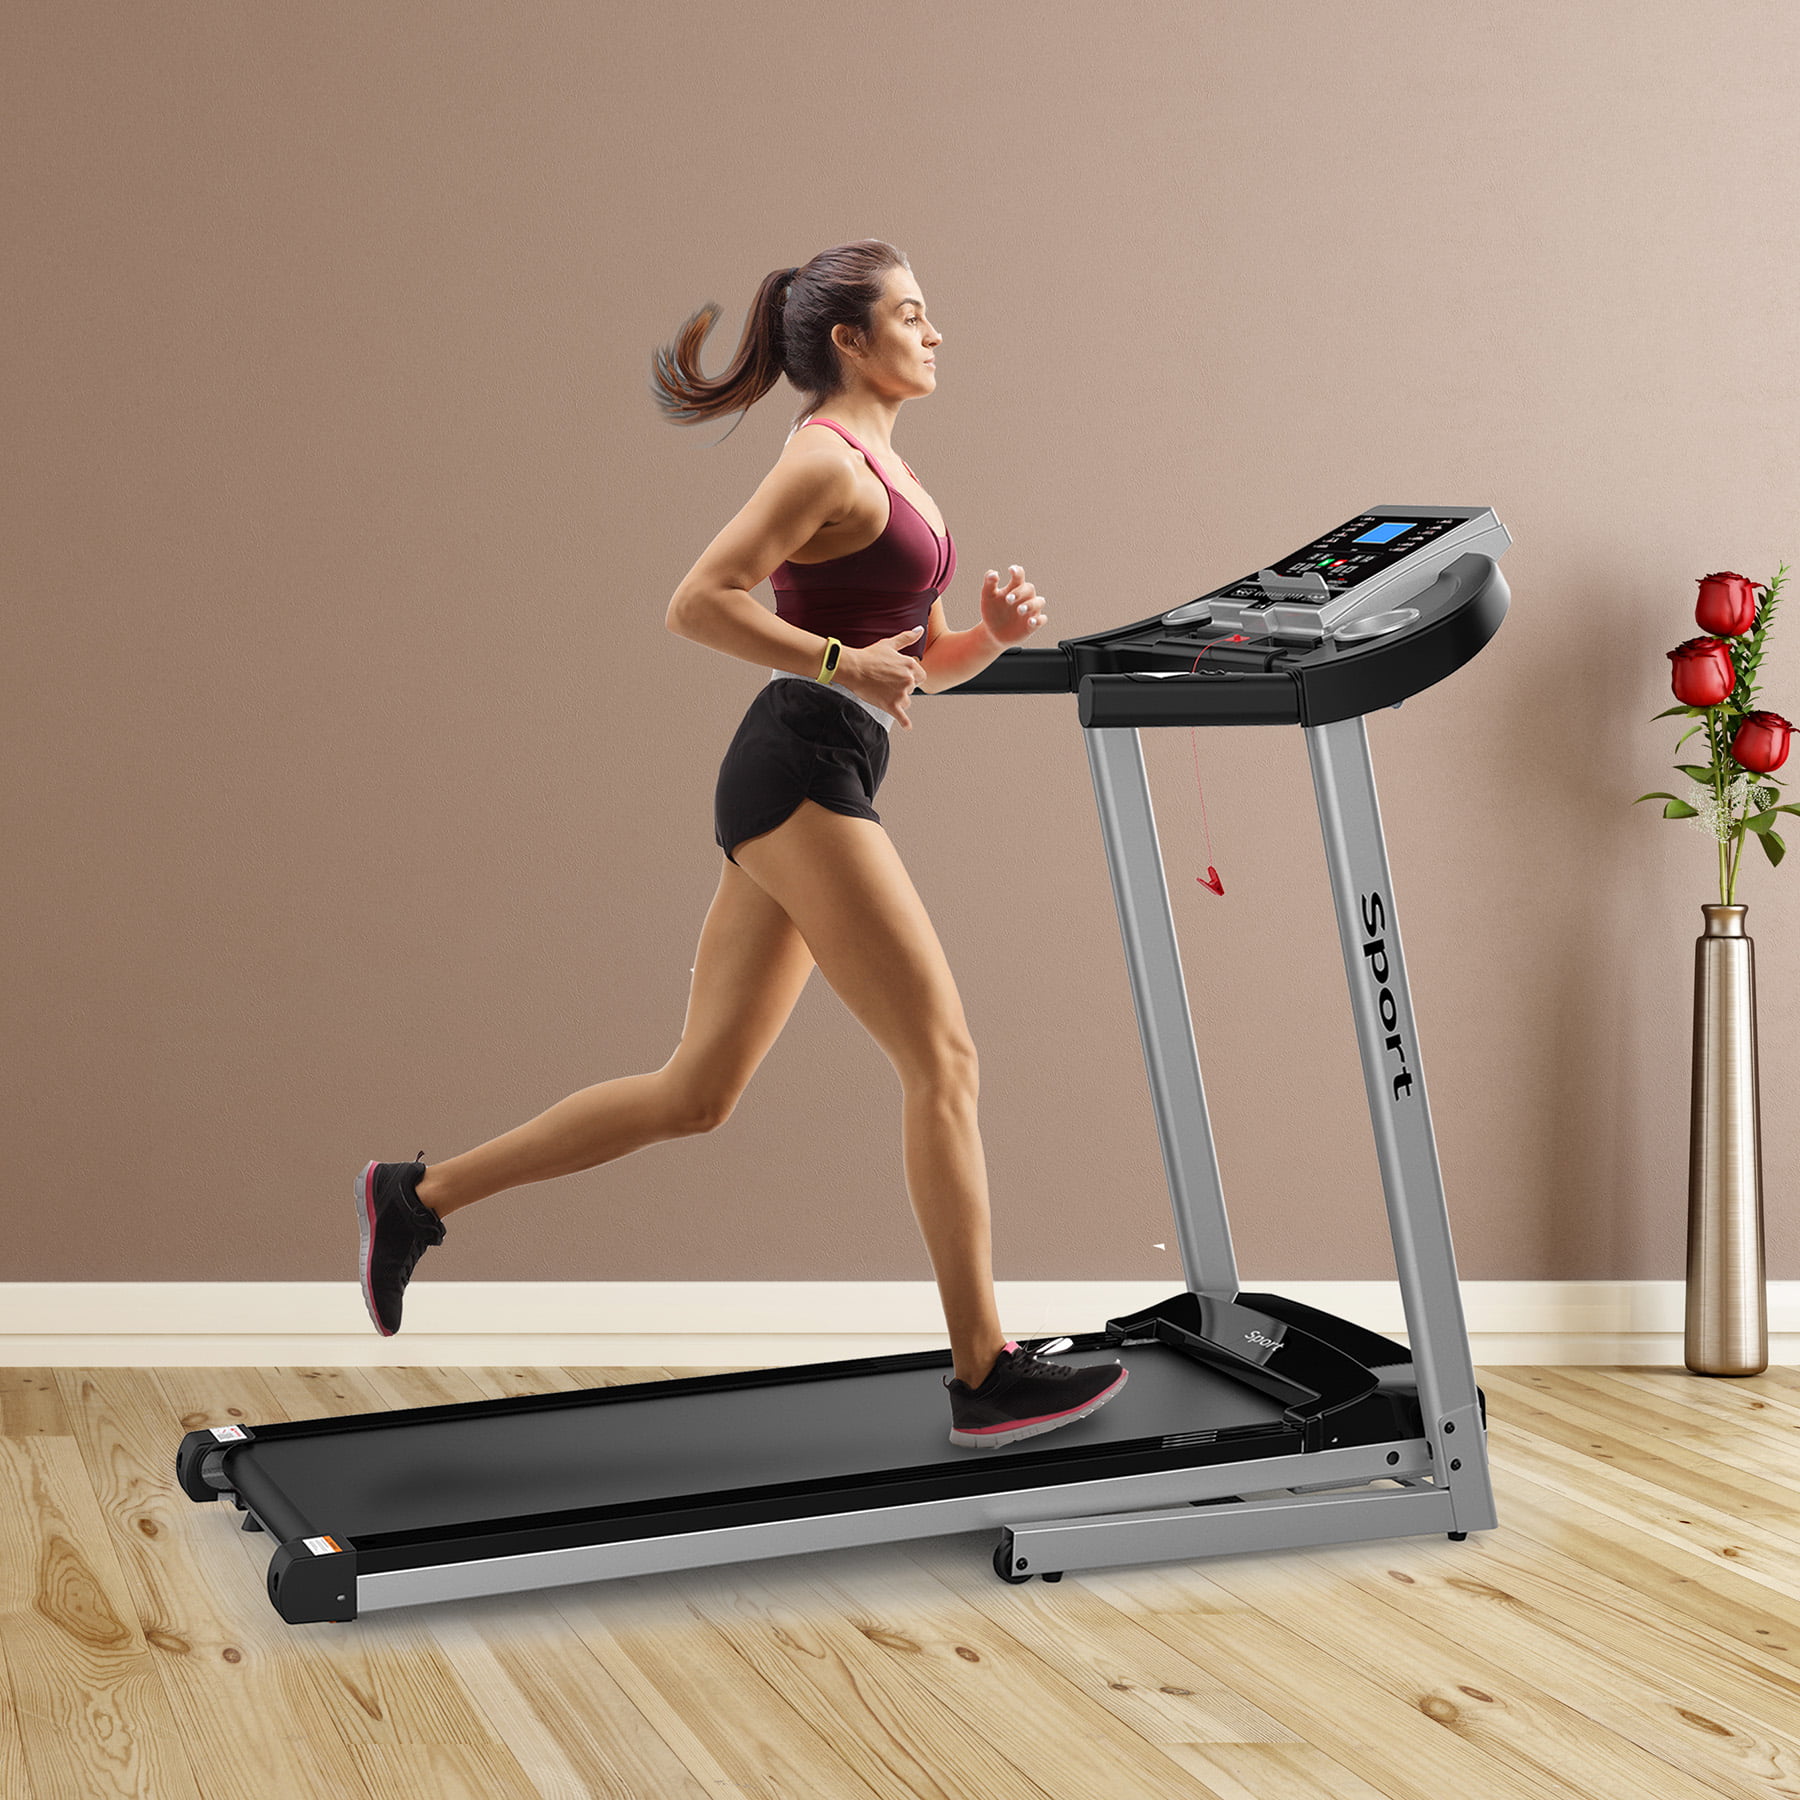 Folding Treadmills for Home with LCD Motorized Running Walking Jogging Exercise Fitness Machine Trainer Equipment for Home Gym Office FUNMILY Treadmills 